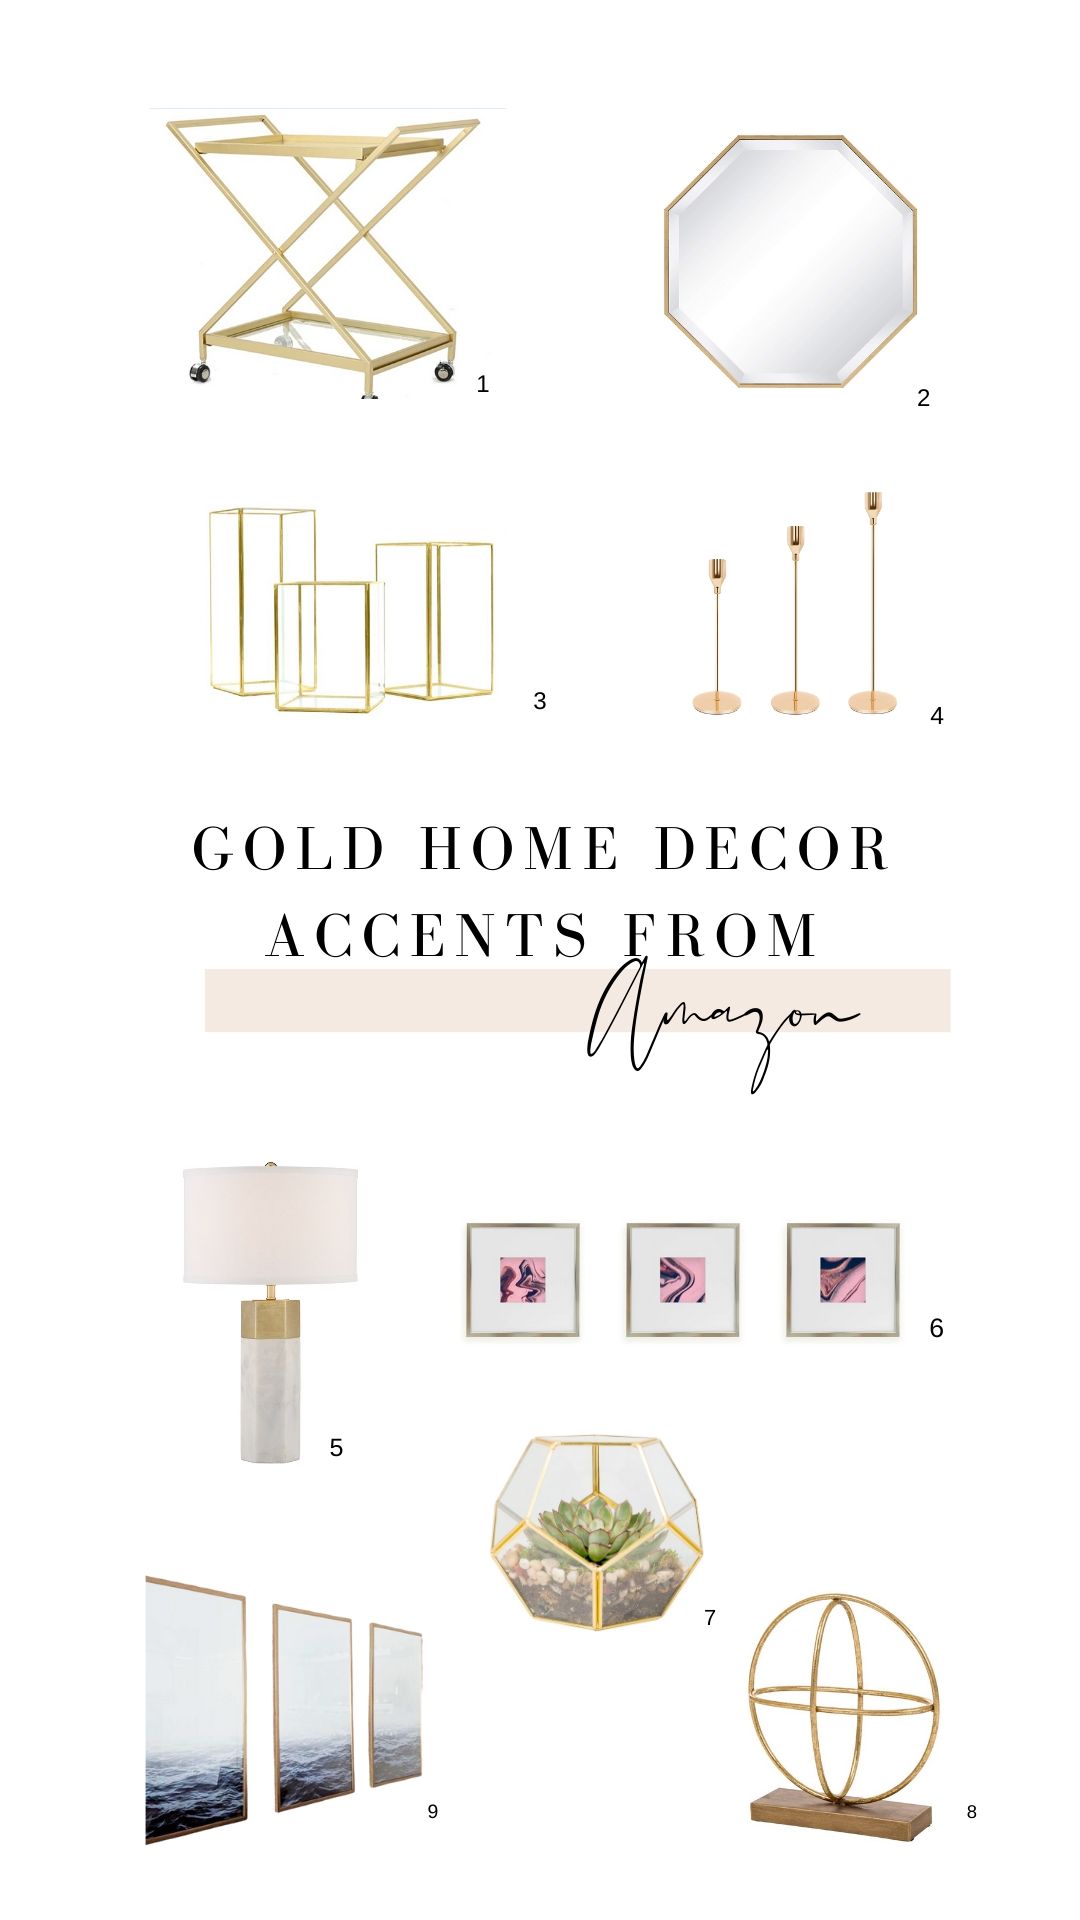 HD Pin-Gold Home Decor Accents